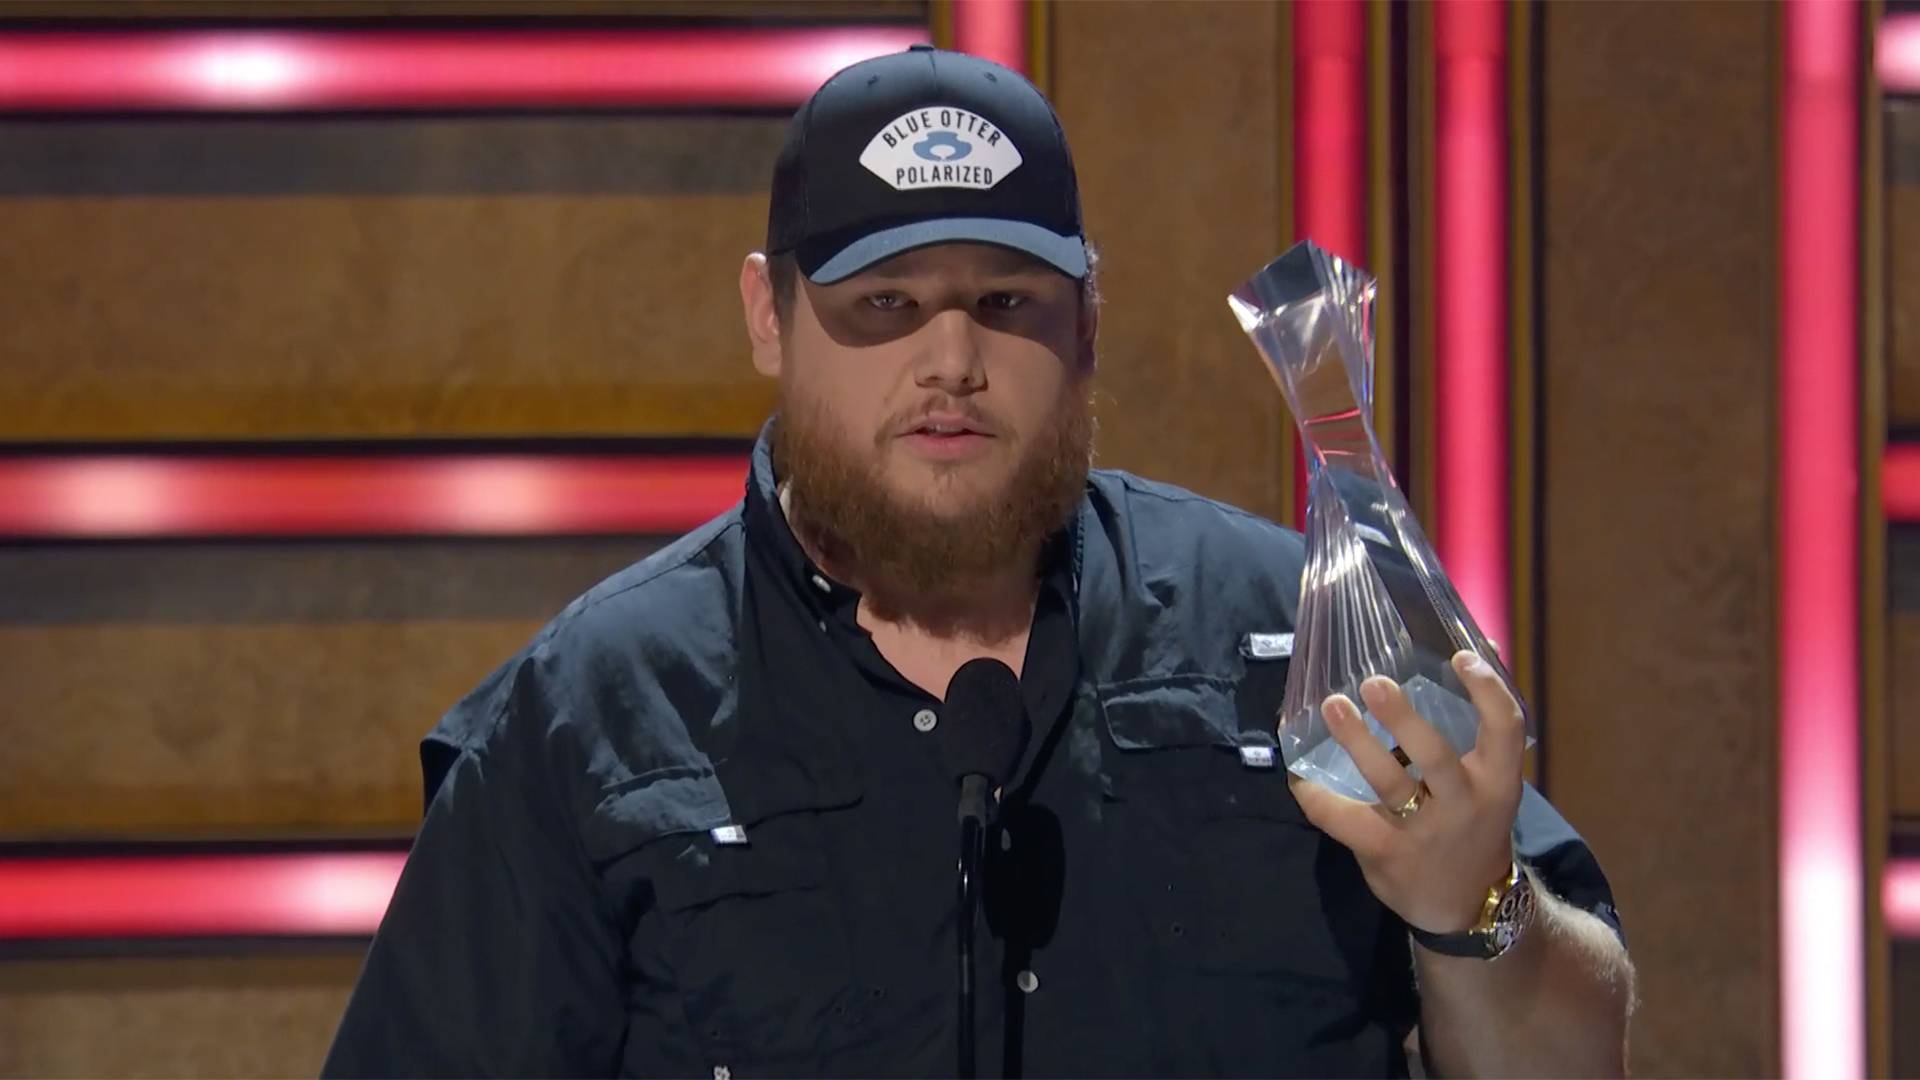 Luke Comb being honored at CMT Artists of the Year 2021.